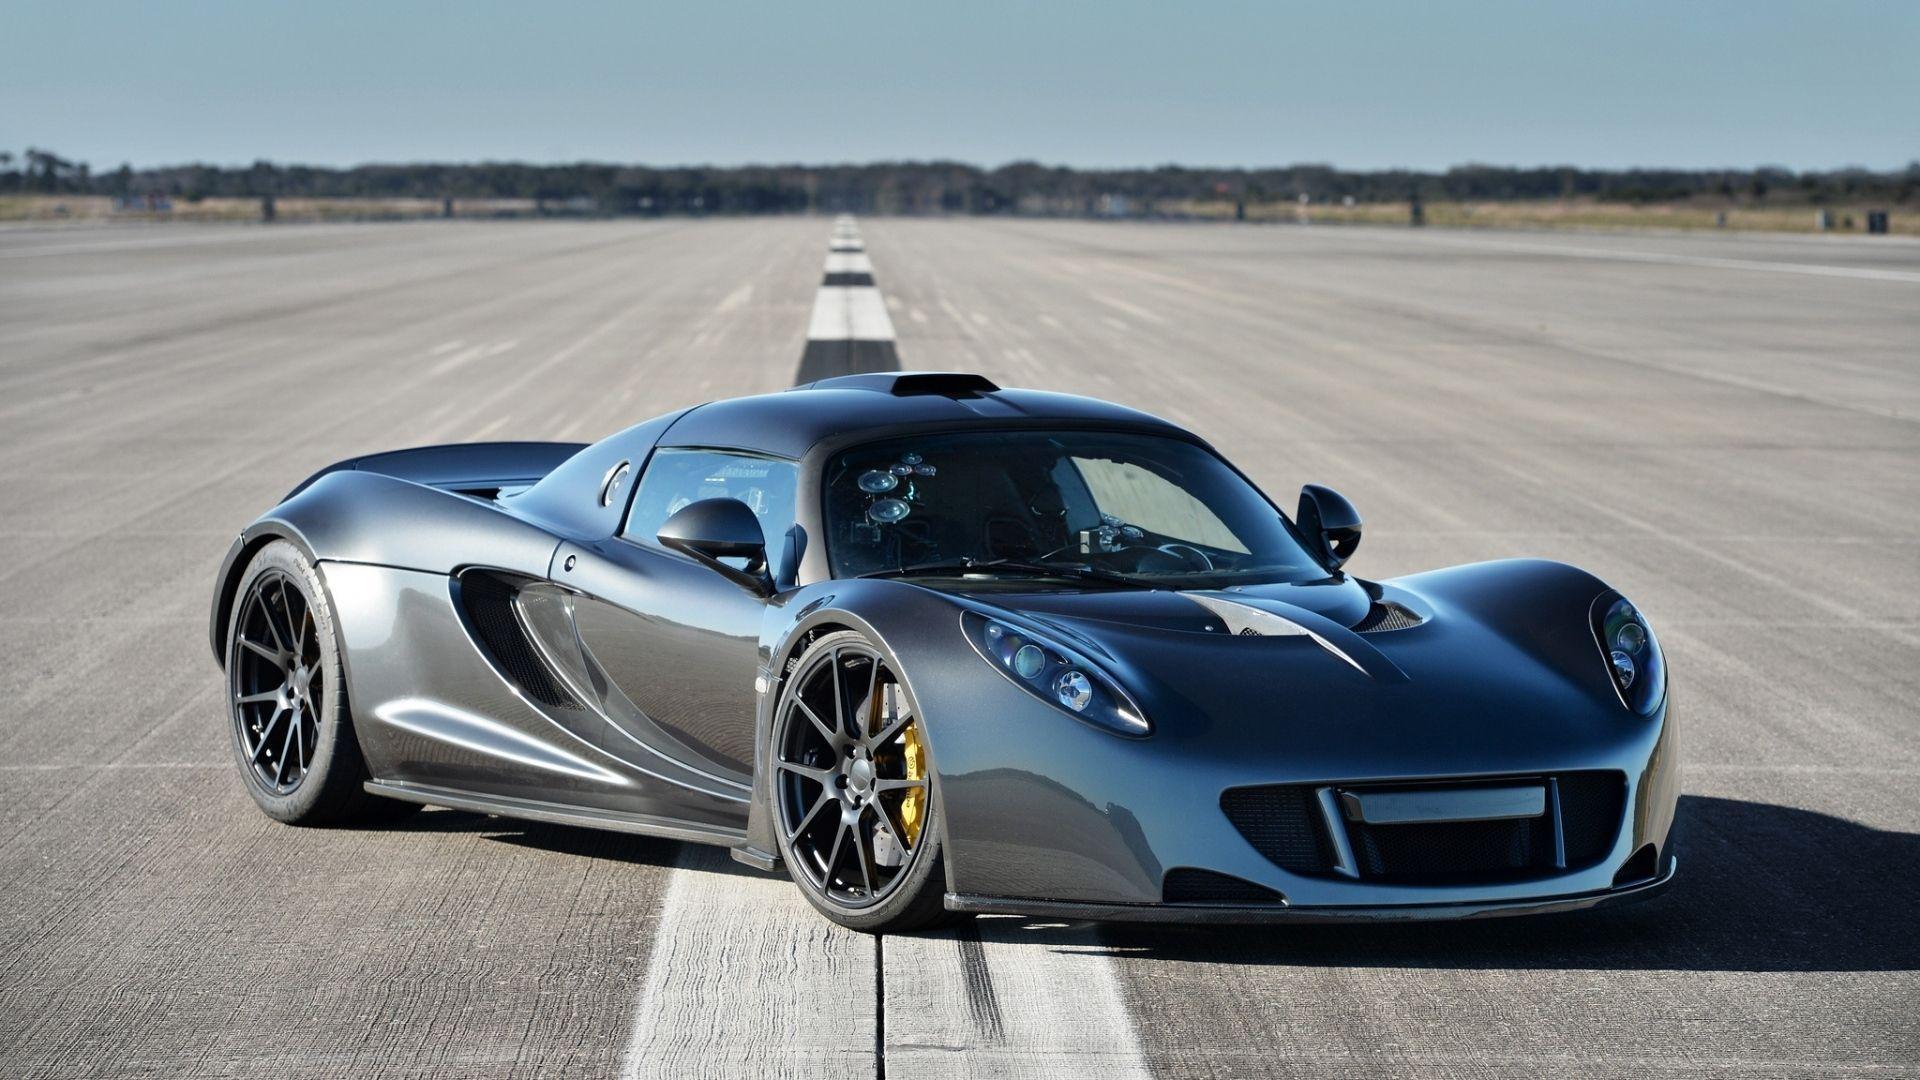 Top Hennessey Venom Gt Wallpaper FULL HD 1920×1080 For PC Background